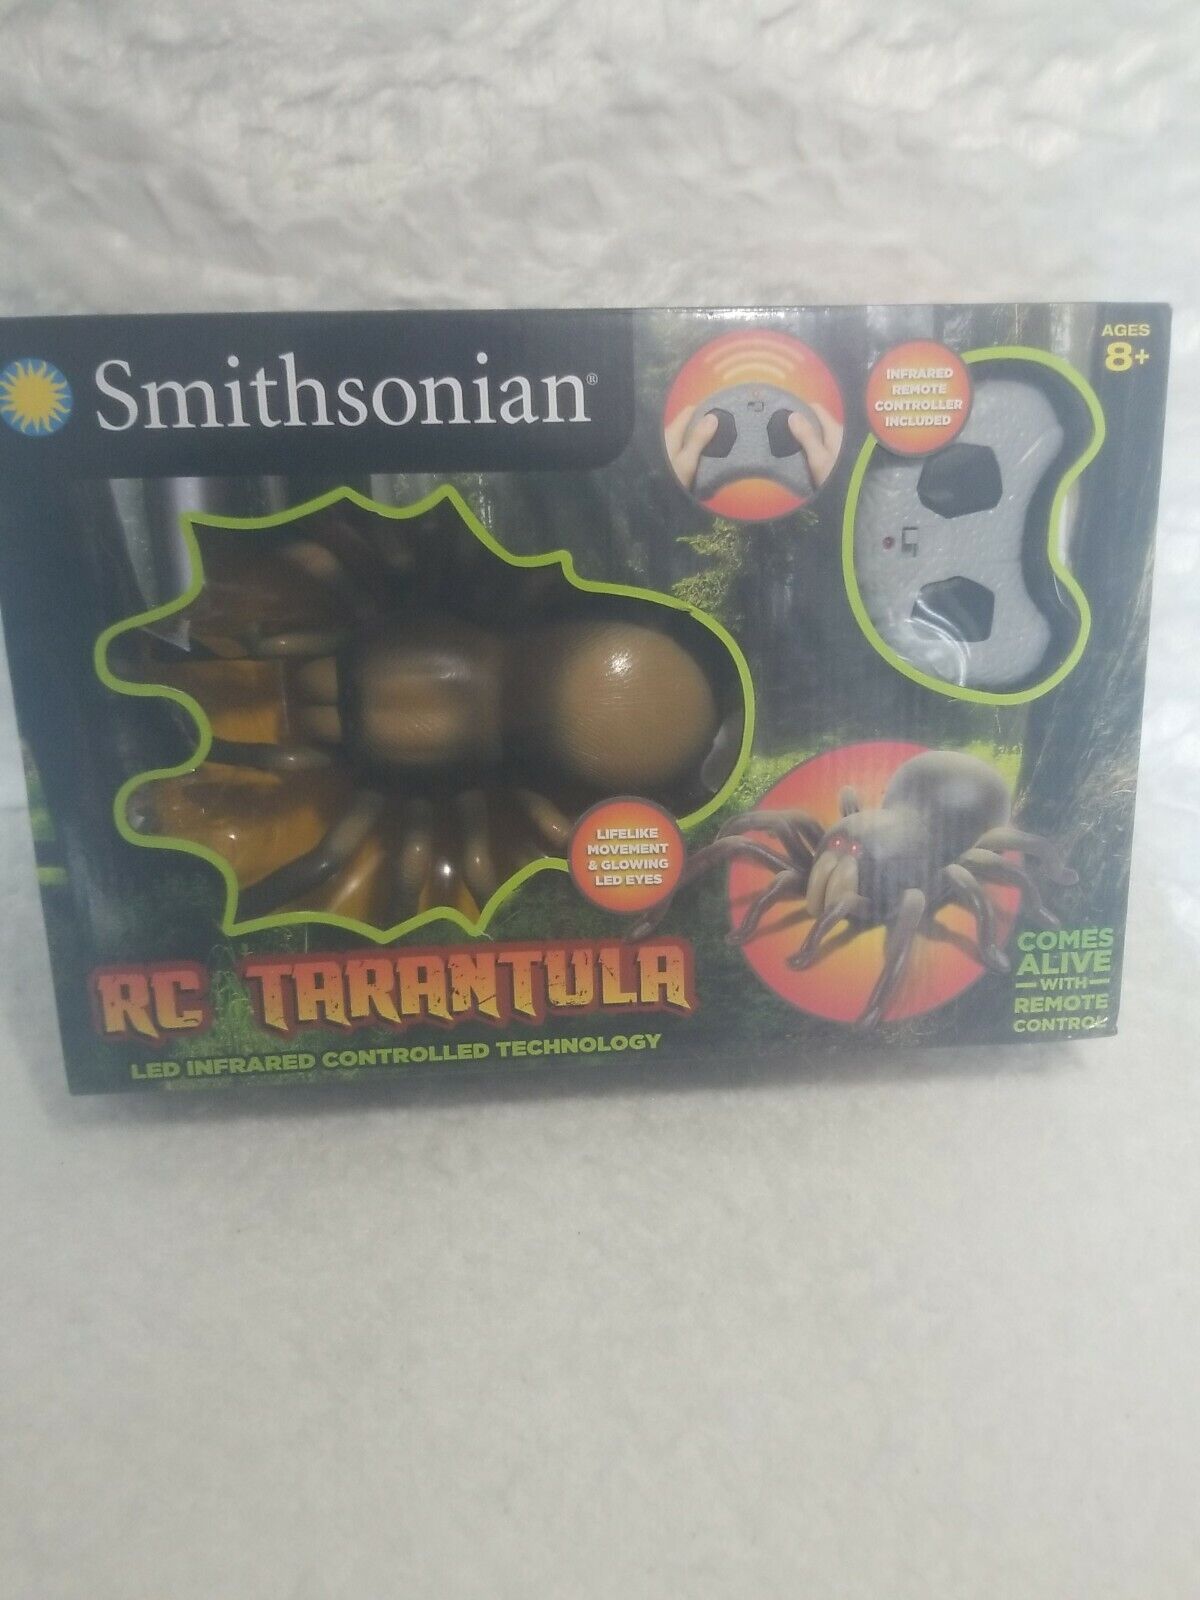 Smithsonian RC Tarantula LED Infrared Controlled Tech Remote Control NOS